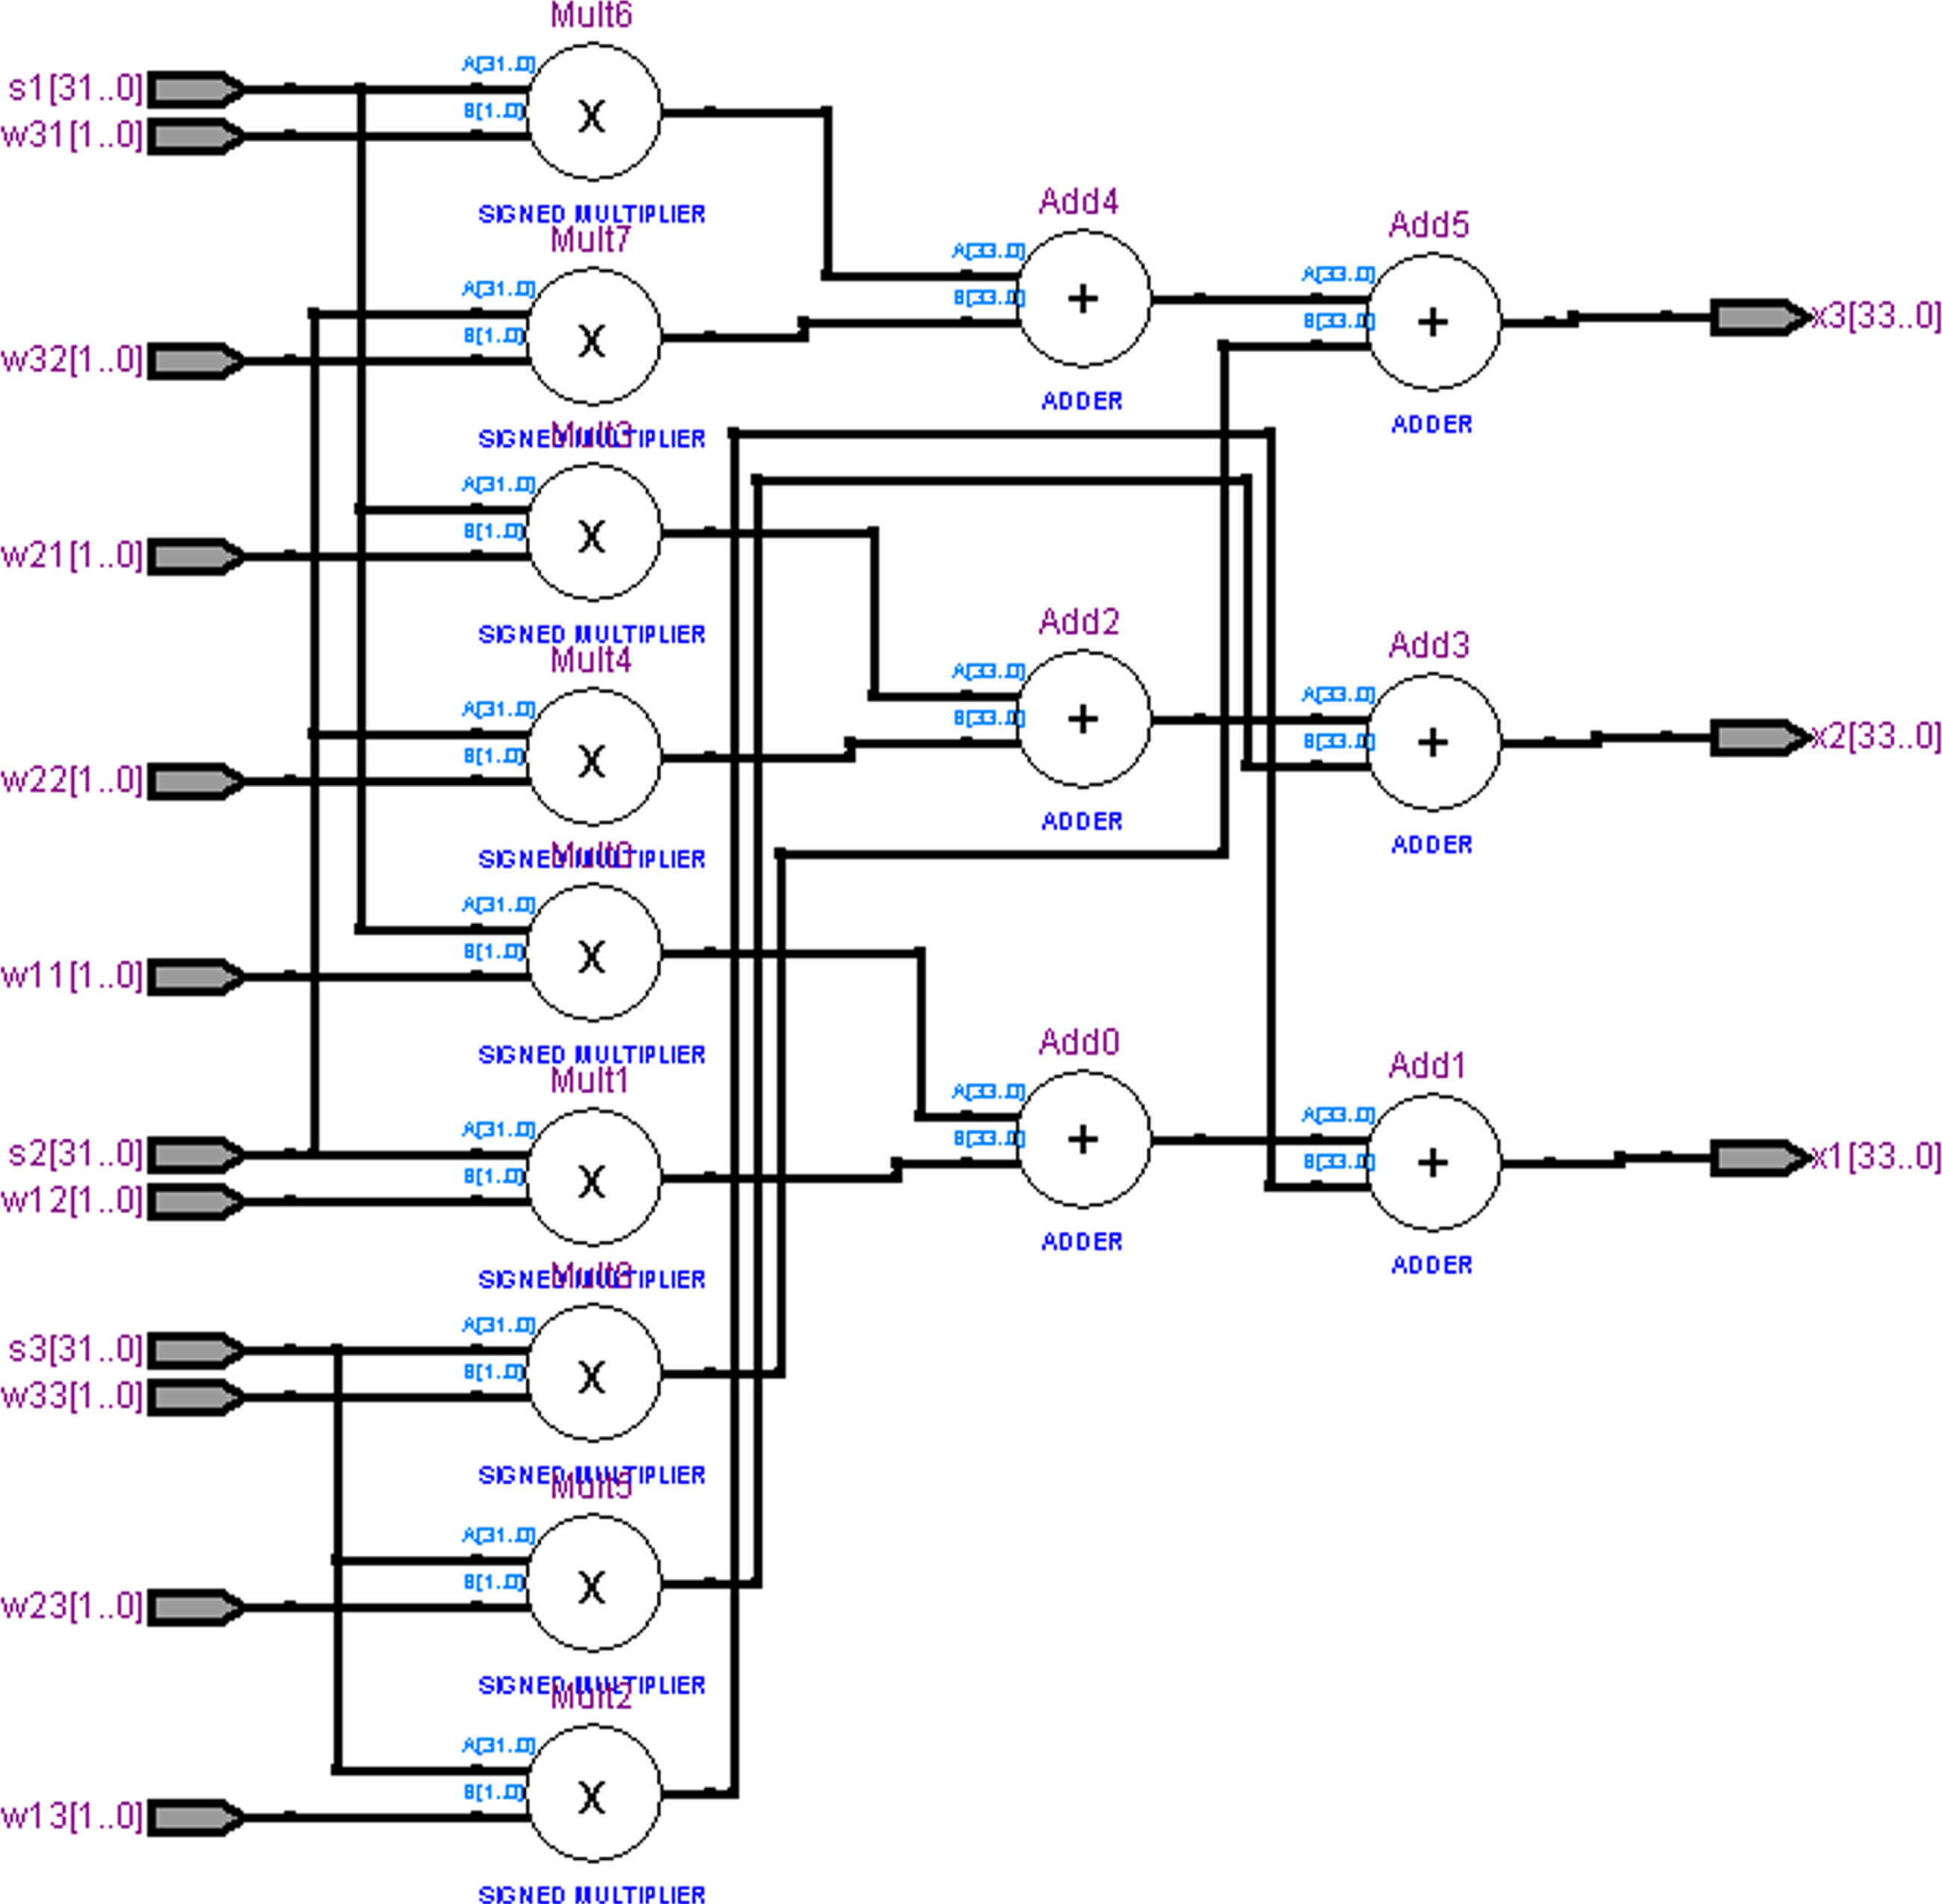 RTL View of Mixer Subsystem [23, 24].